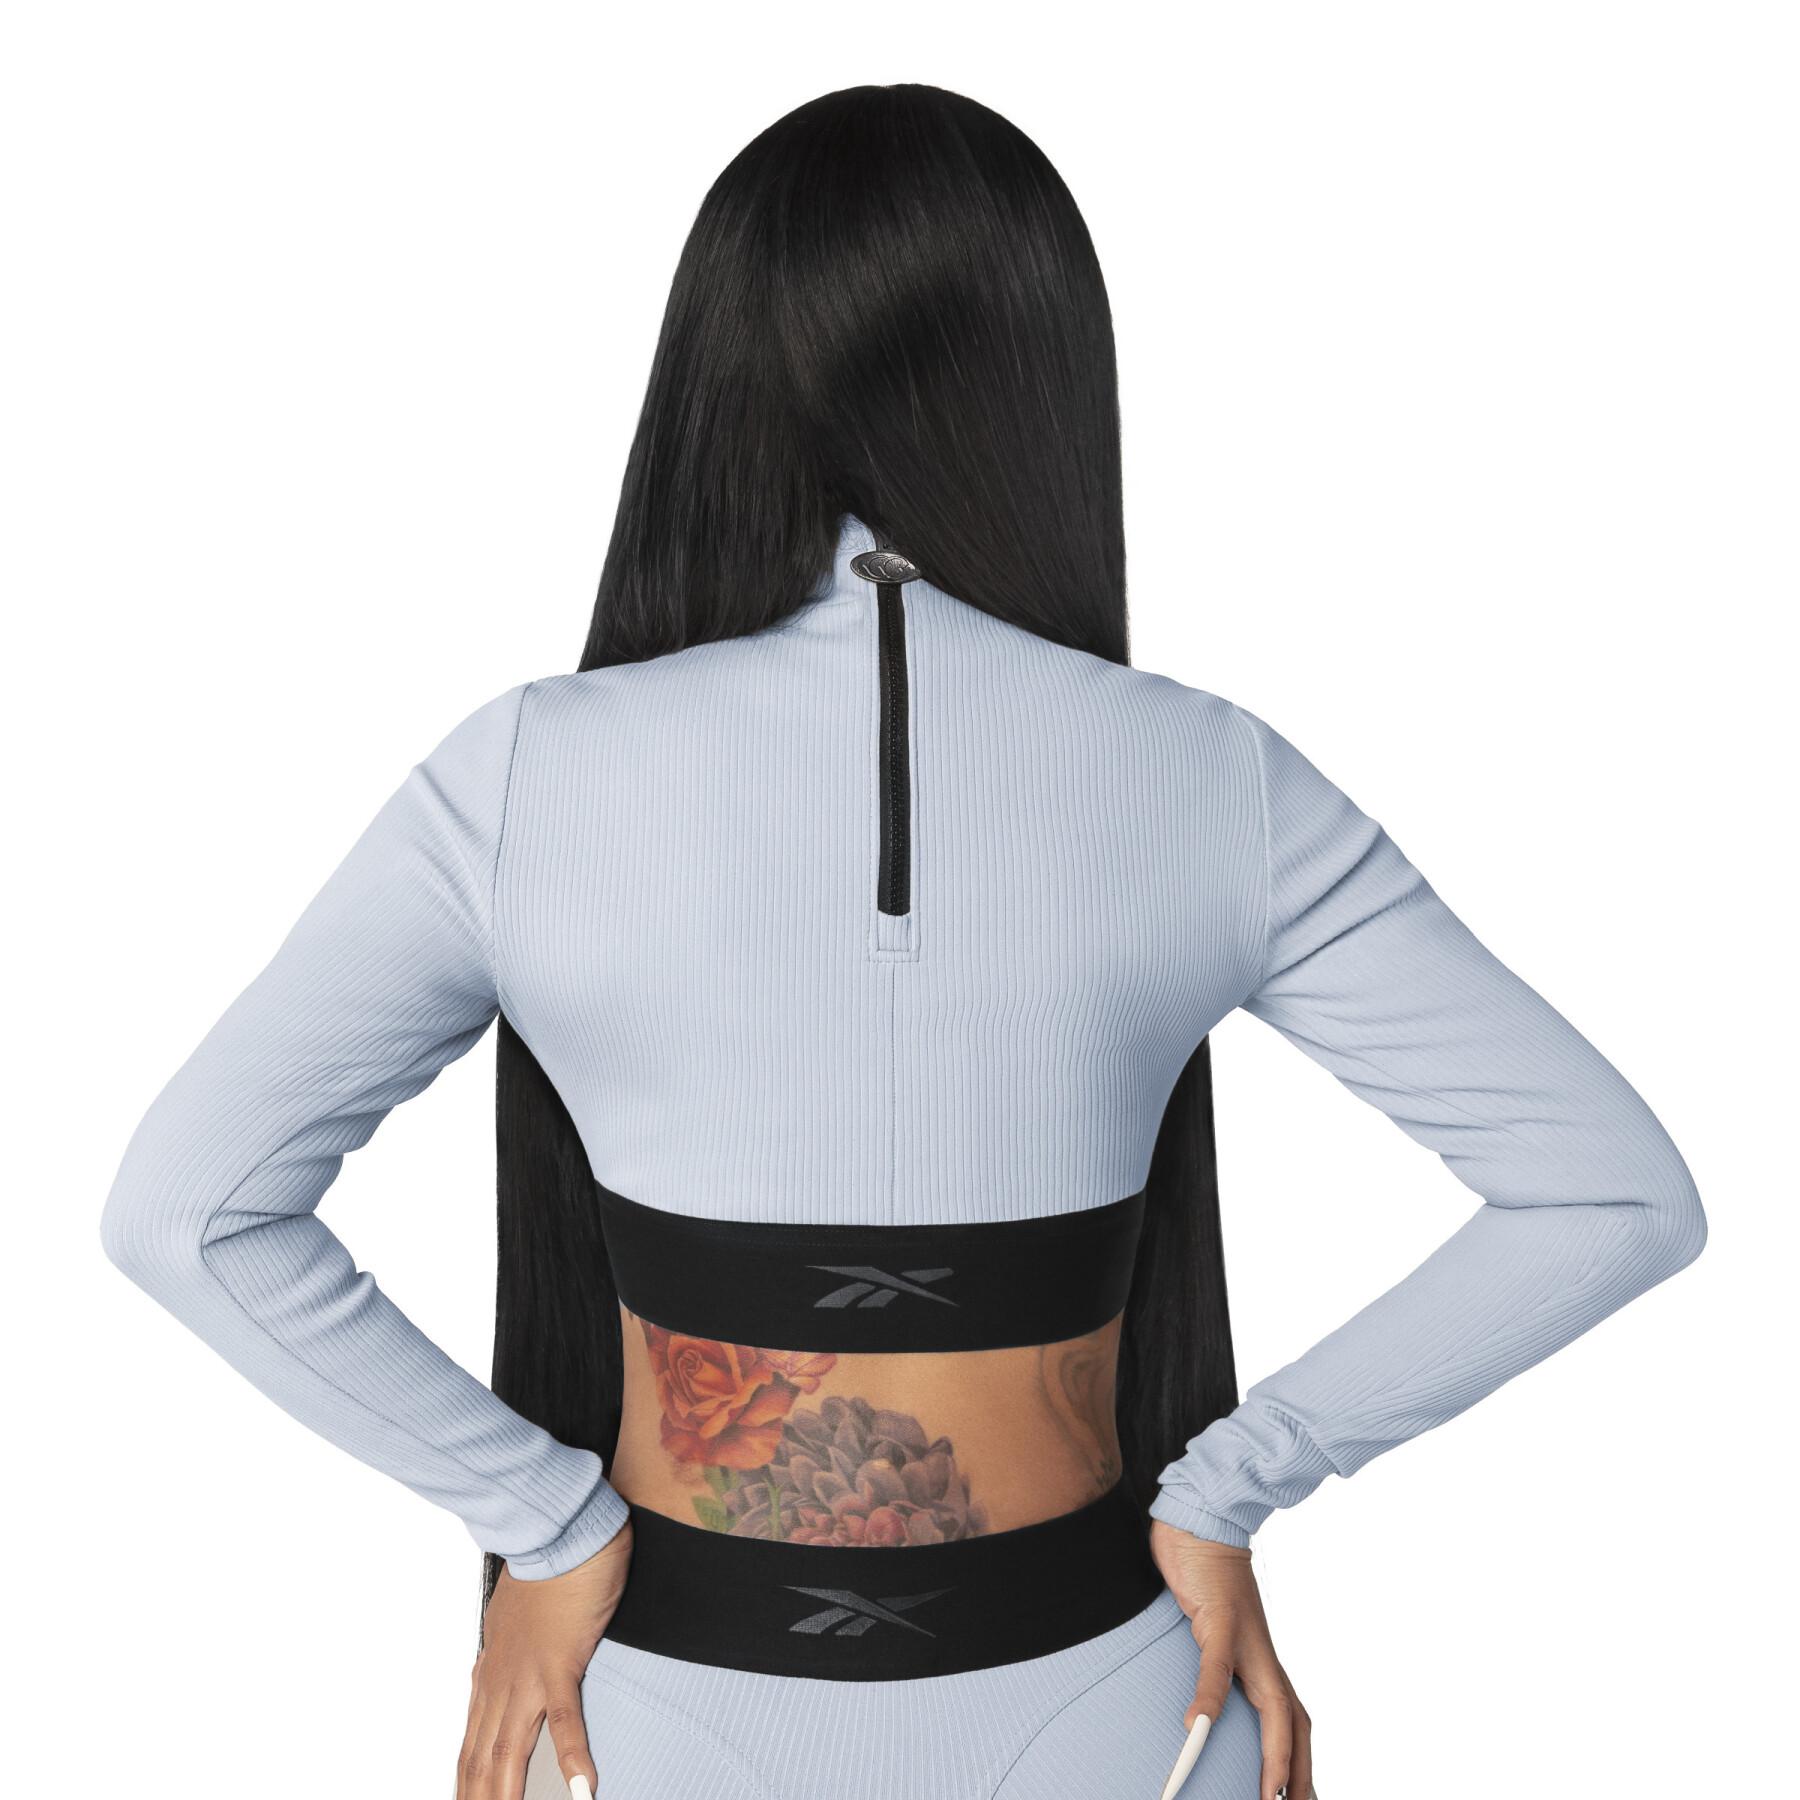 Women's crop top with long sleeves and thick sides Reebok Cardi B